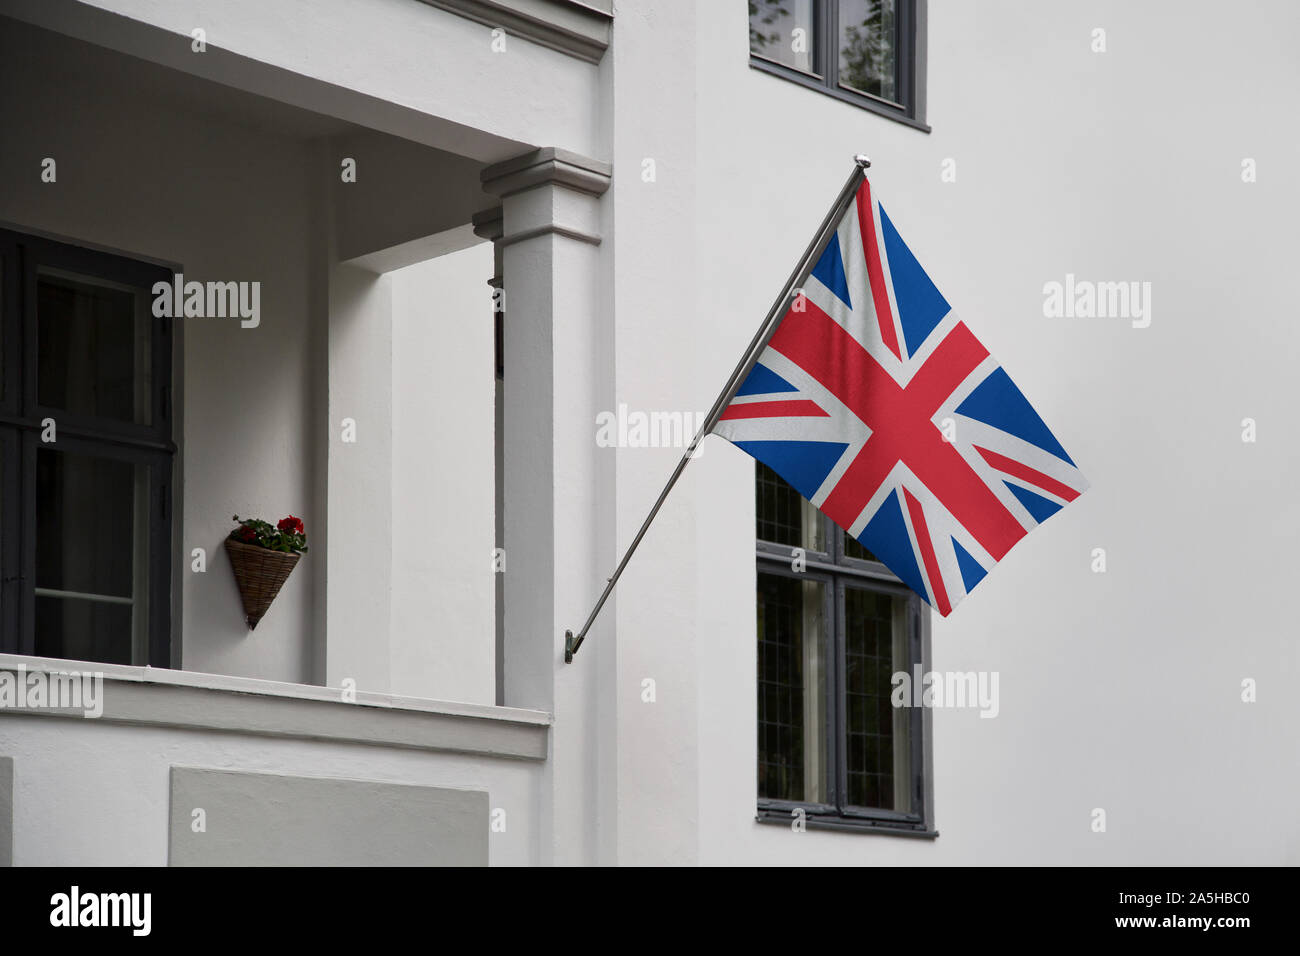 UK flag. British Union Jack flag displaying on a pole in front of the house. National flag of Great Britain waving on a home hanging from a pole Stock Photo